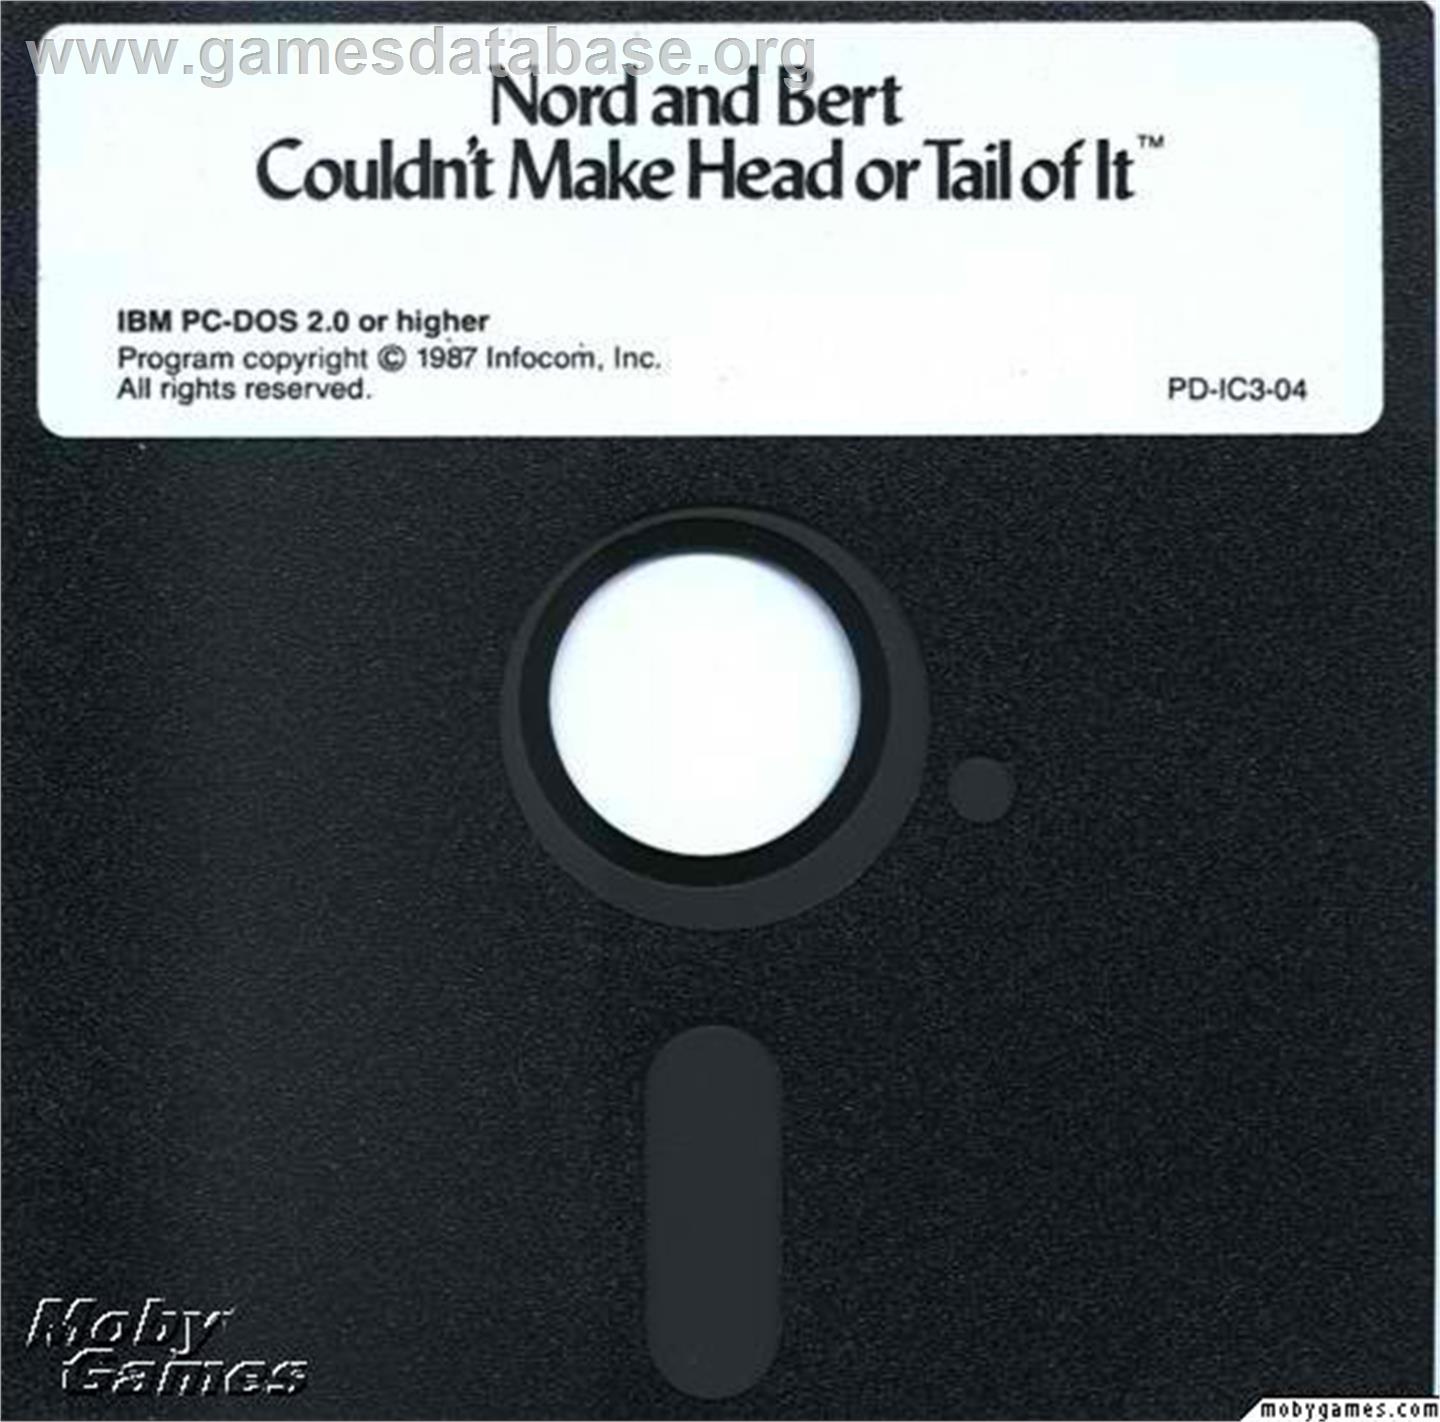 Nord and Bert Couldn't Make Head or Tail of It - Microsoft DOS - Artwork - Disc